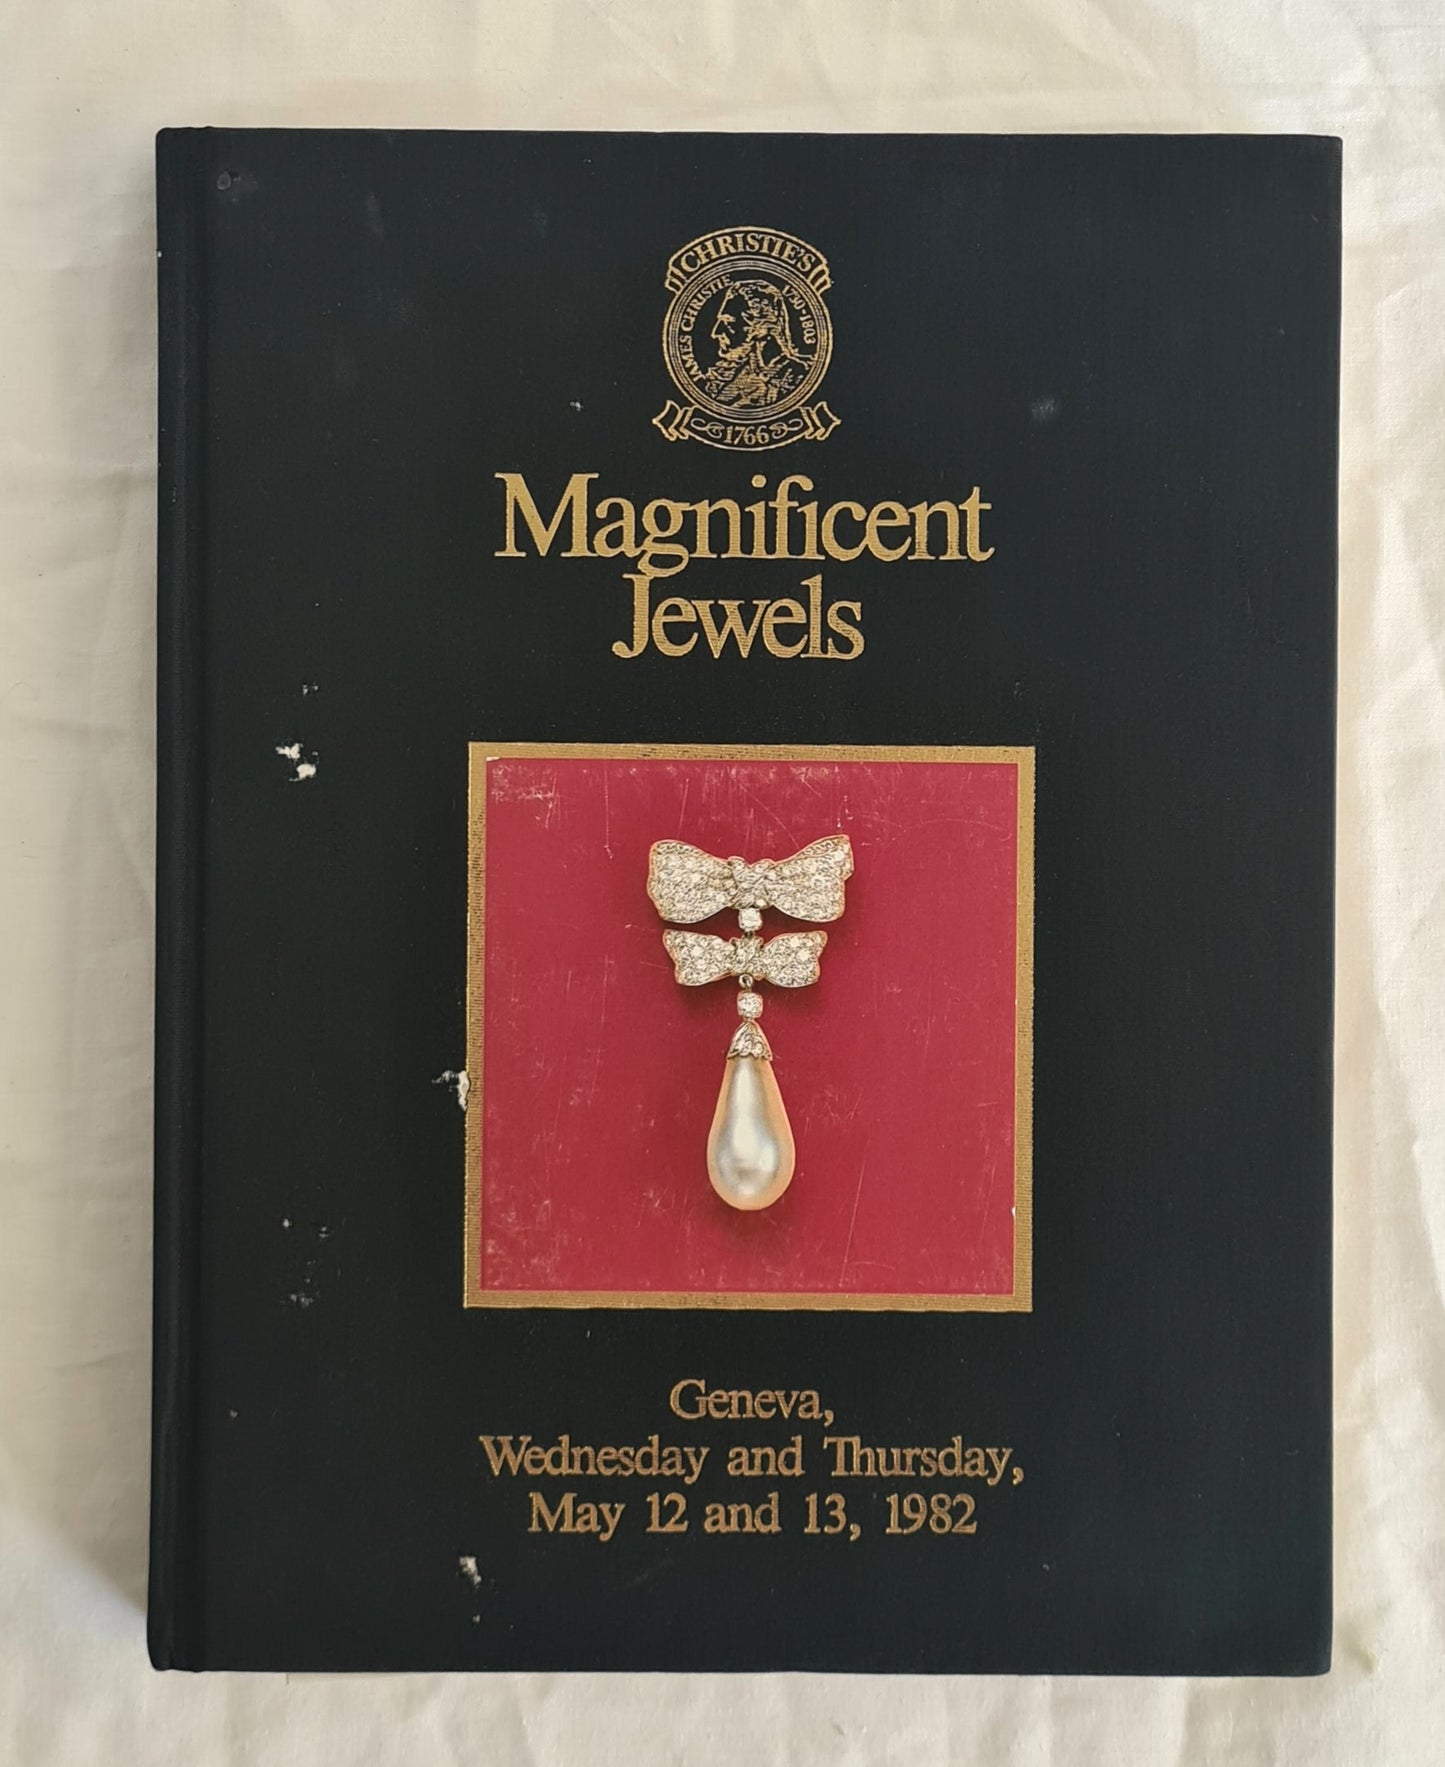 Magnificent Jewels  Geneva, Wednesday and Thursday, May 12 and 13, 1982